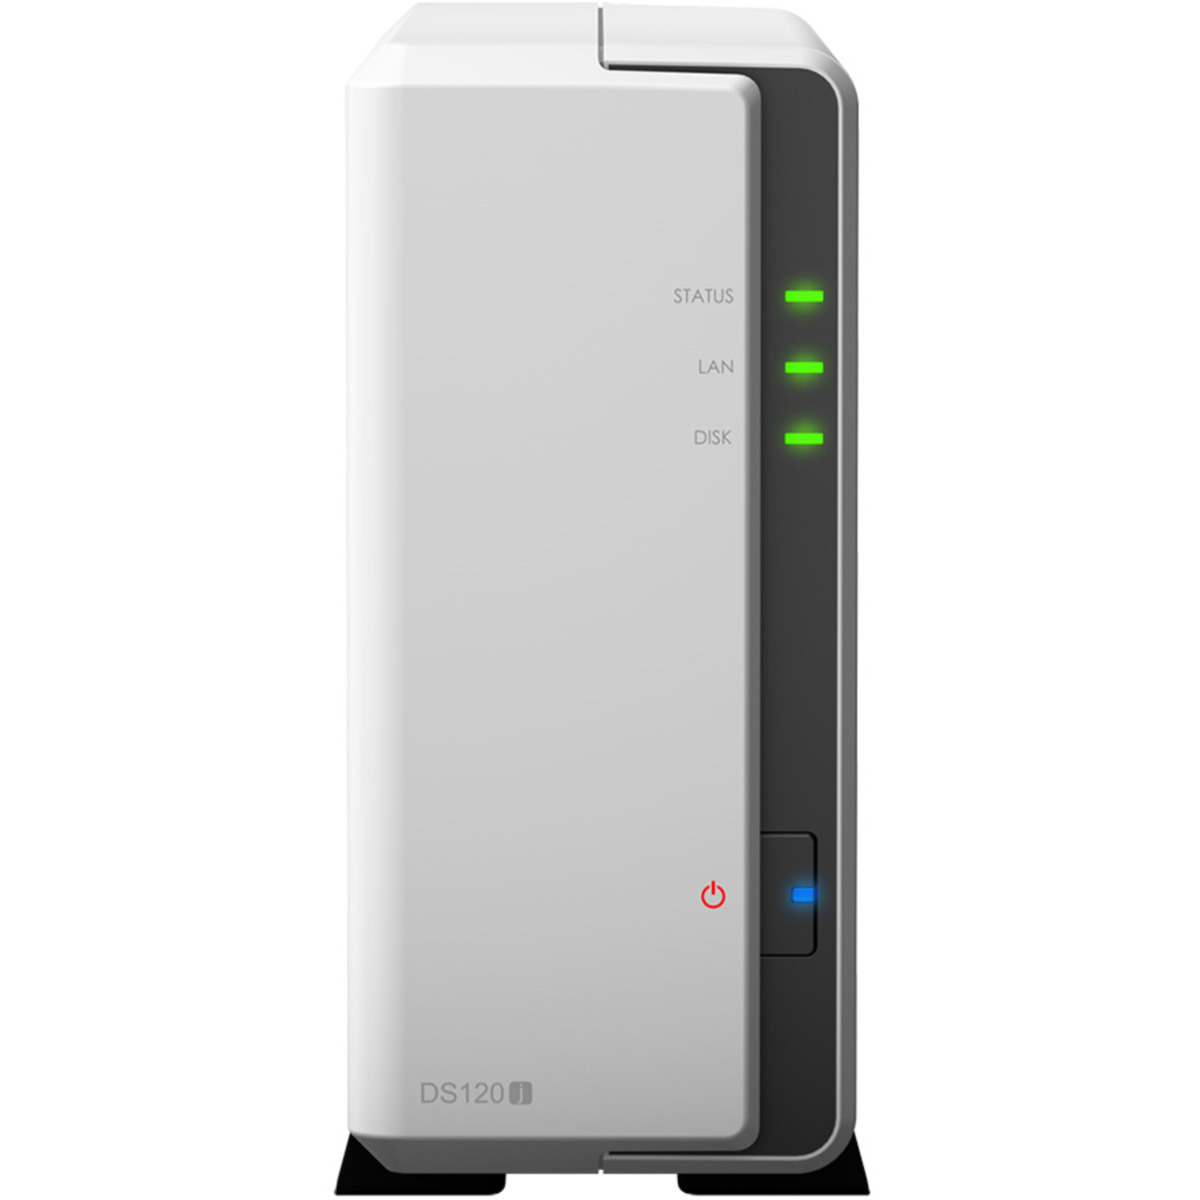 buy Synology DiskStation DS120j 4tb Desktop NAS - Network Attached Storage Device 1x4000gb Seagate BarraCuda ST4000DM004 3.5 7200rpm SATA 6Gb/s HDD CONSUMER Class Drives Installed - Burn-In Tested - nas headquarters buy network attached storage server device das new raid-5 free shipping simply usa DiskStation DS120j